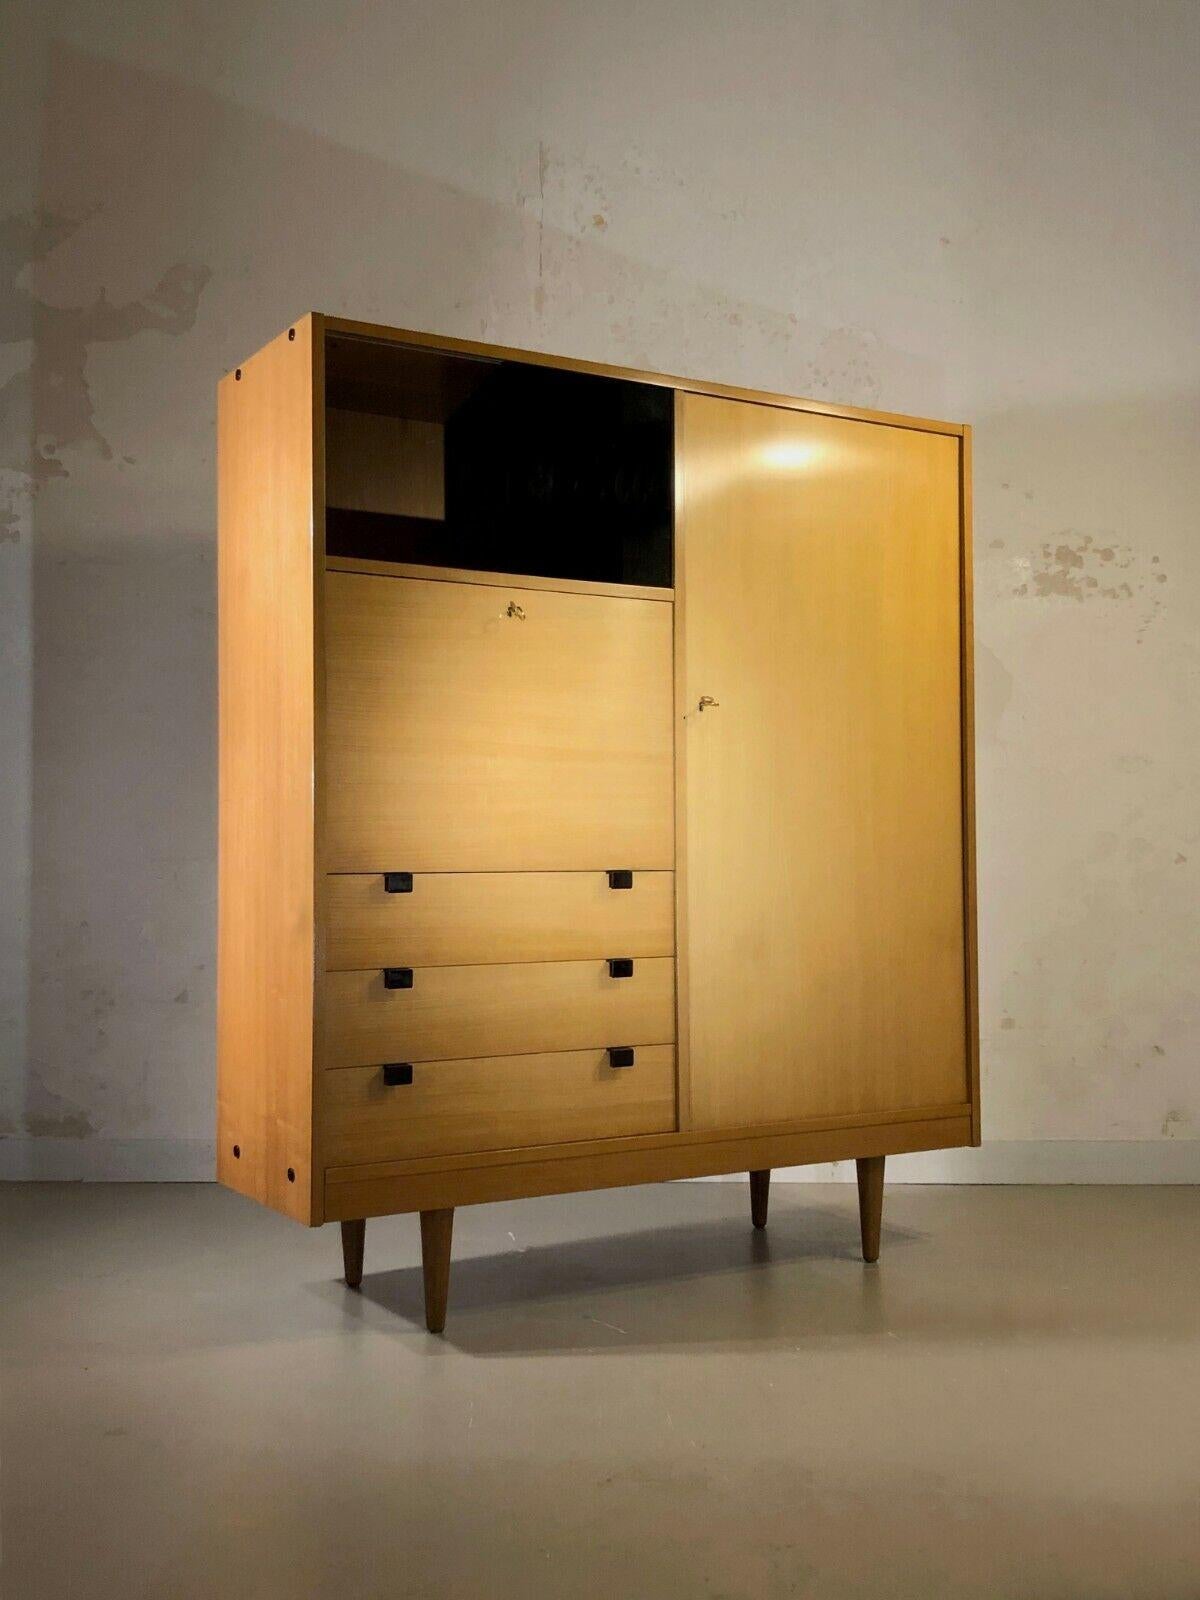 An elegant small wardrobe, Modernist, Bauhaus, Reconstruction, veneer wood structure in clear warm color, a large door opening on the shelving system, with four drawers, one writing desk and shelves with door panels, in the spirit of designs by